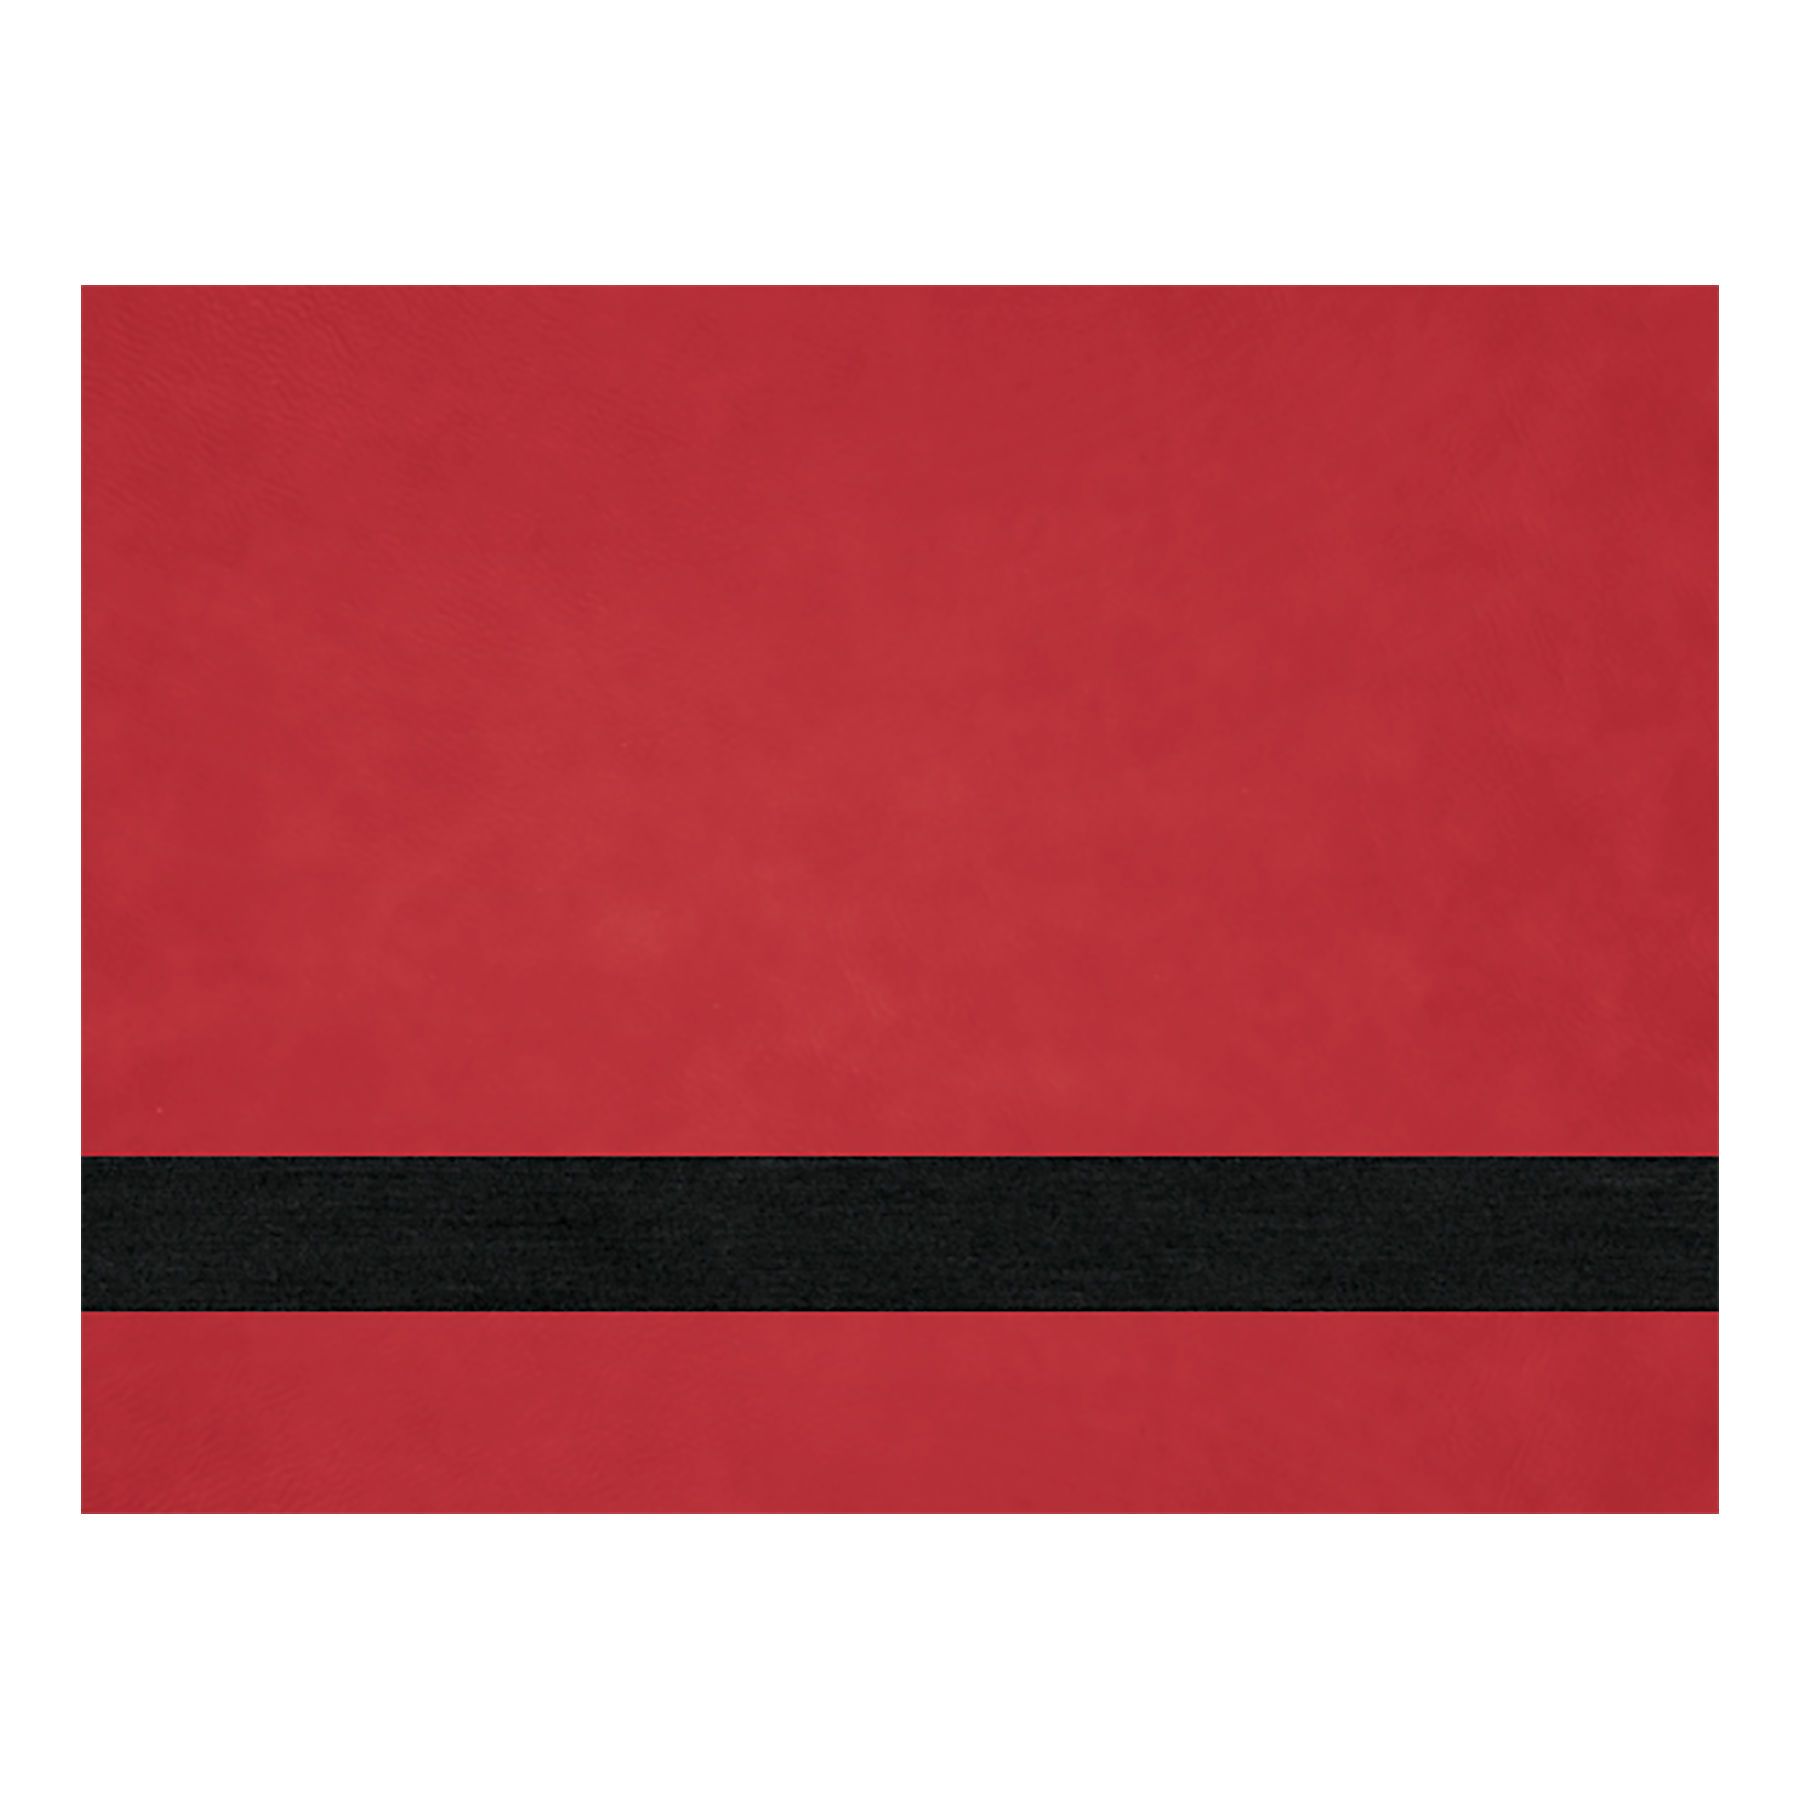 PRE-ORDER! Full Size Laserable Leatherette Sheet Stock, Boss Laser Engravers (Available Jan. 2022) Engraving Supplies Craftworks NW LS-1630 (29" x 15") Red/Black 